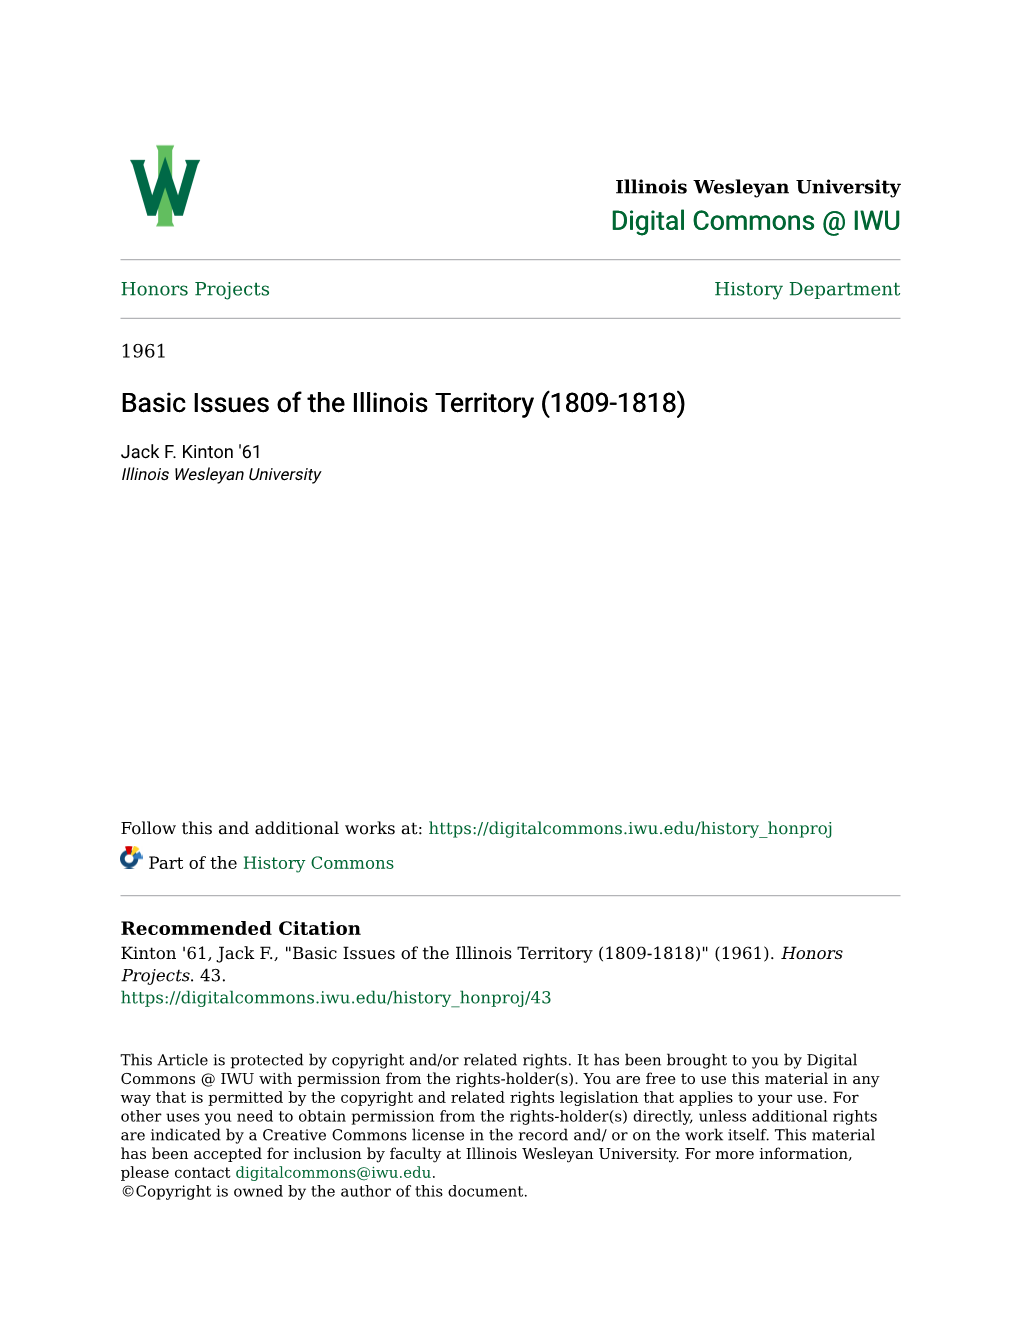 Basic Issues of the Illinois Territory (1809-1818)